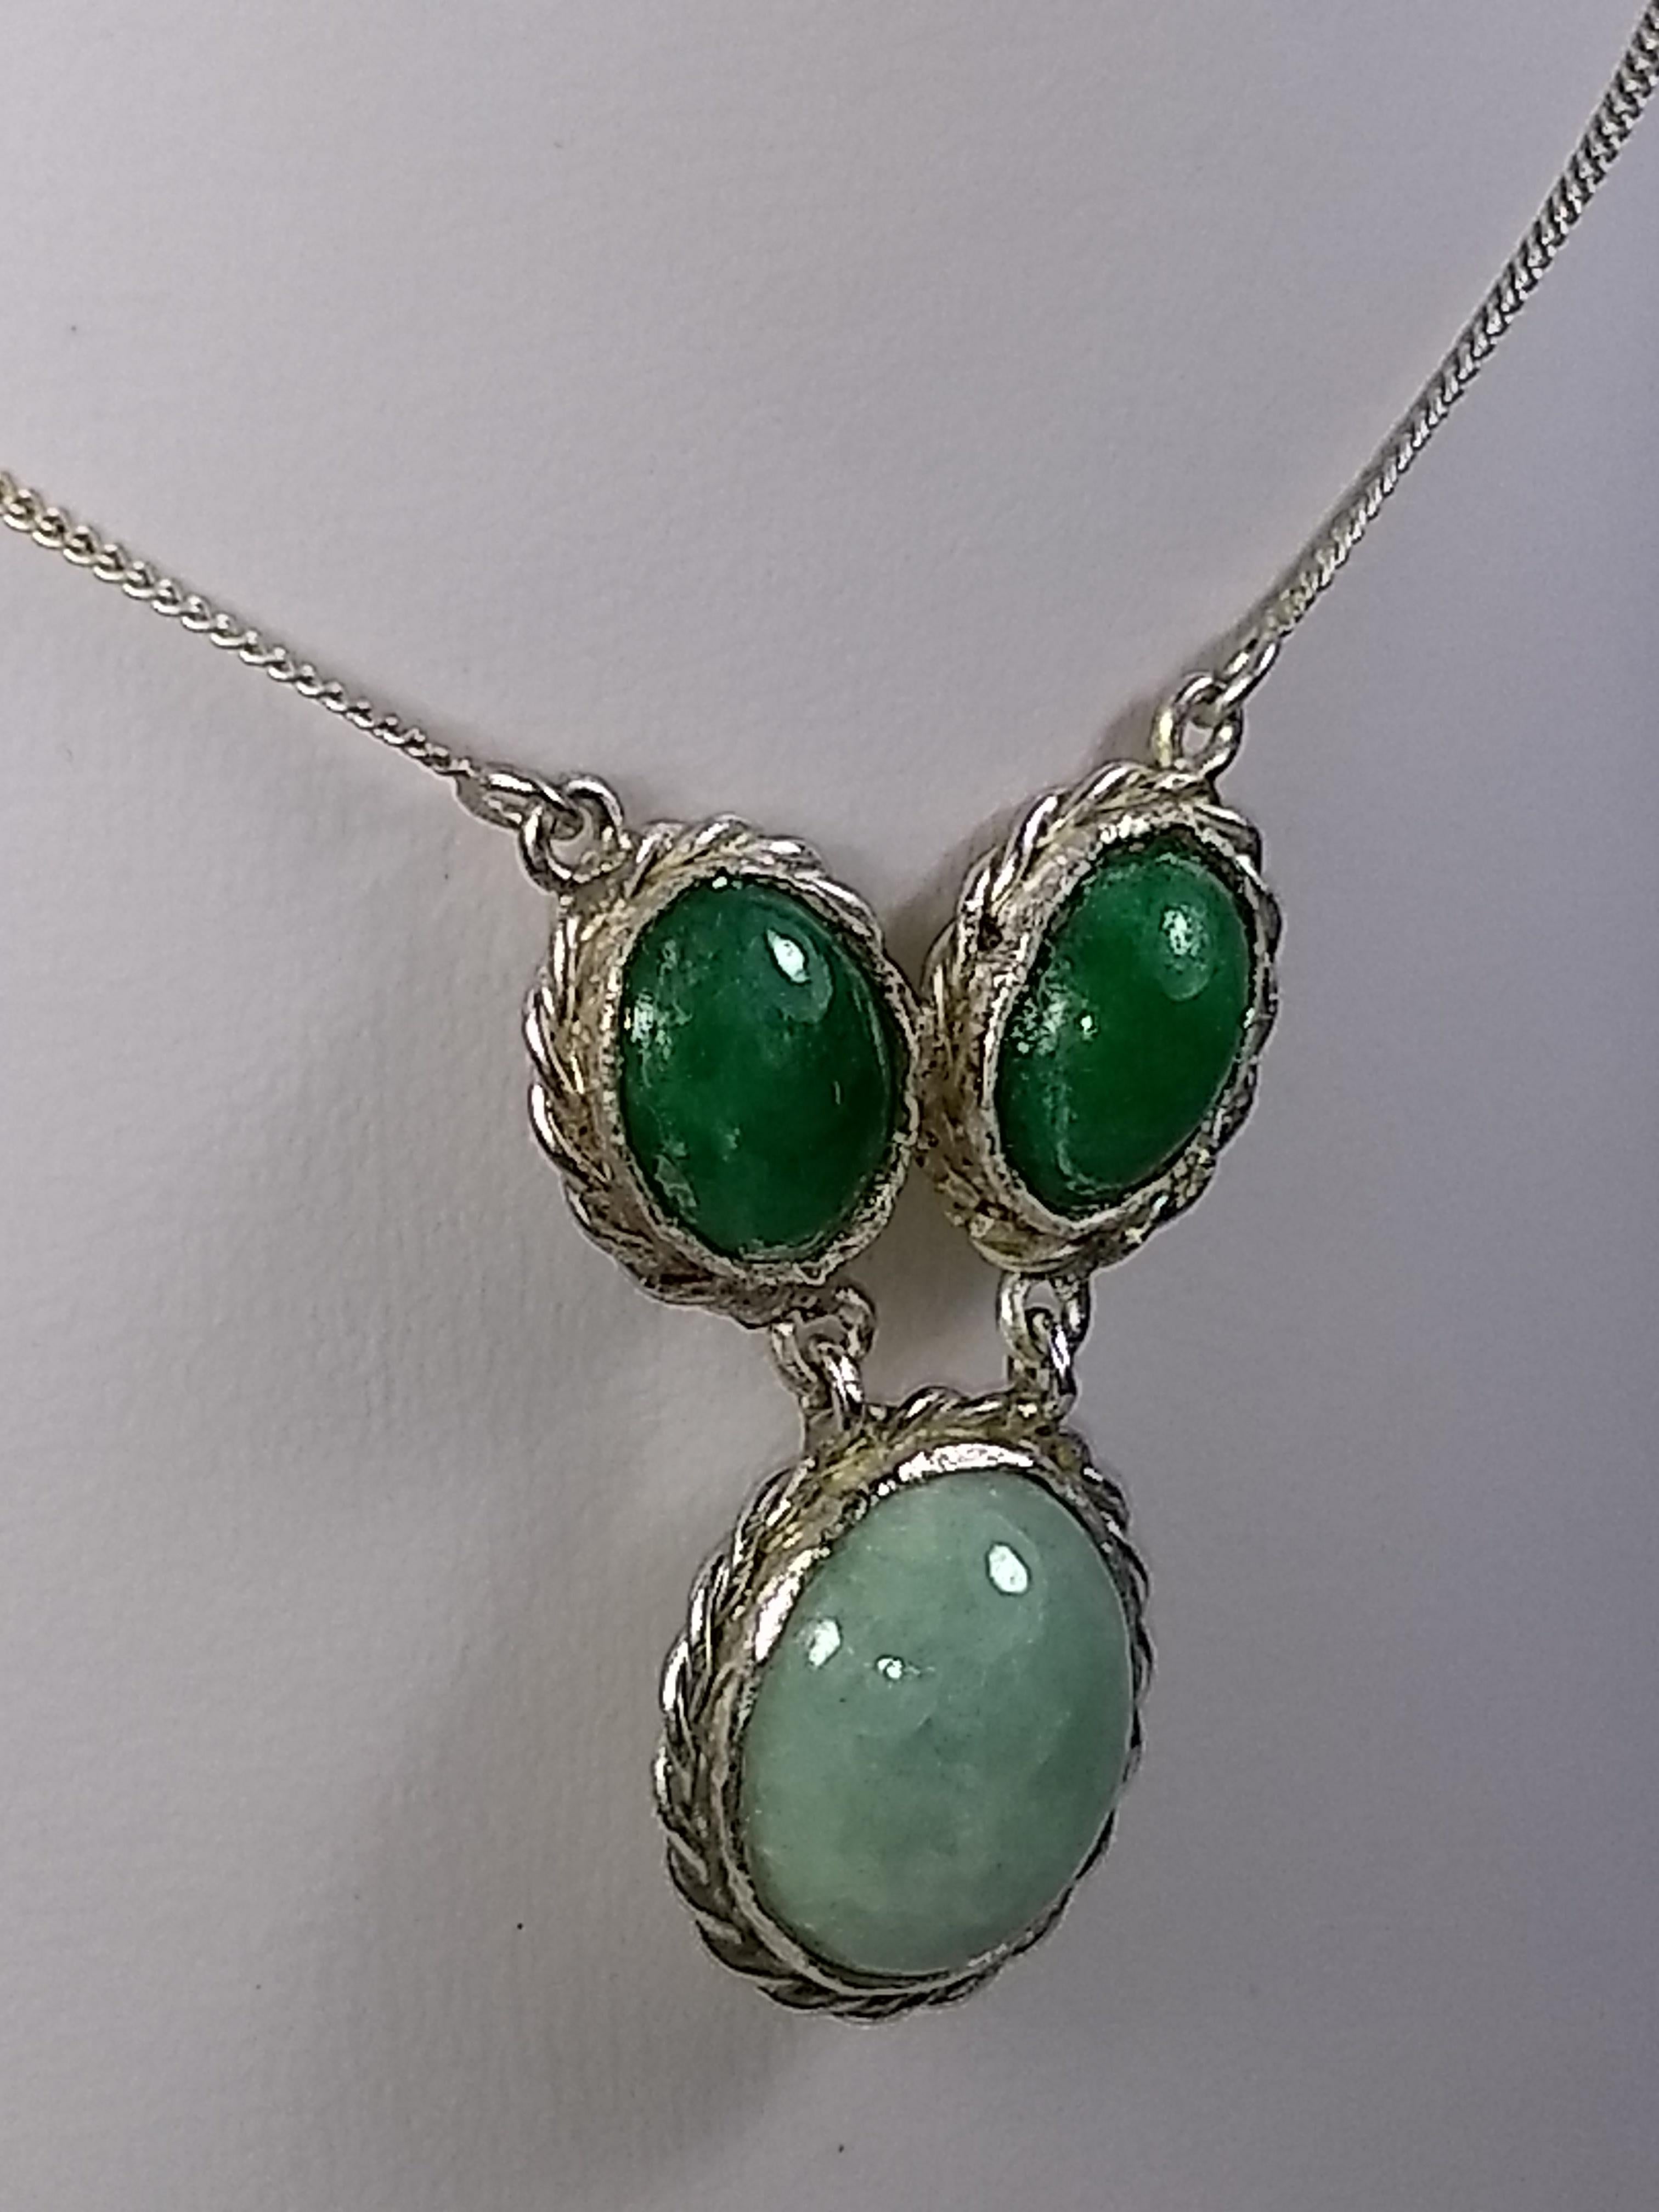 This Alberto Juan one of a kind necklace was handmade from Mexican silver and natural jade, sourced from Myanmar ,  The chain and findings used in this piece are sterling silver. Necklace measures 17